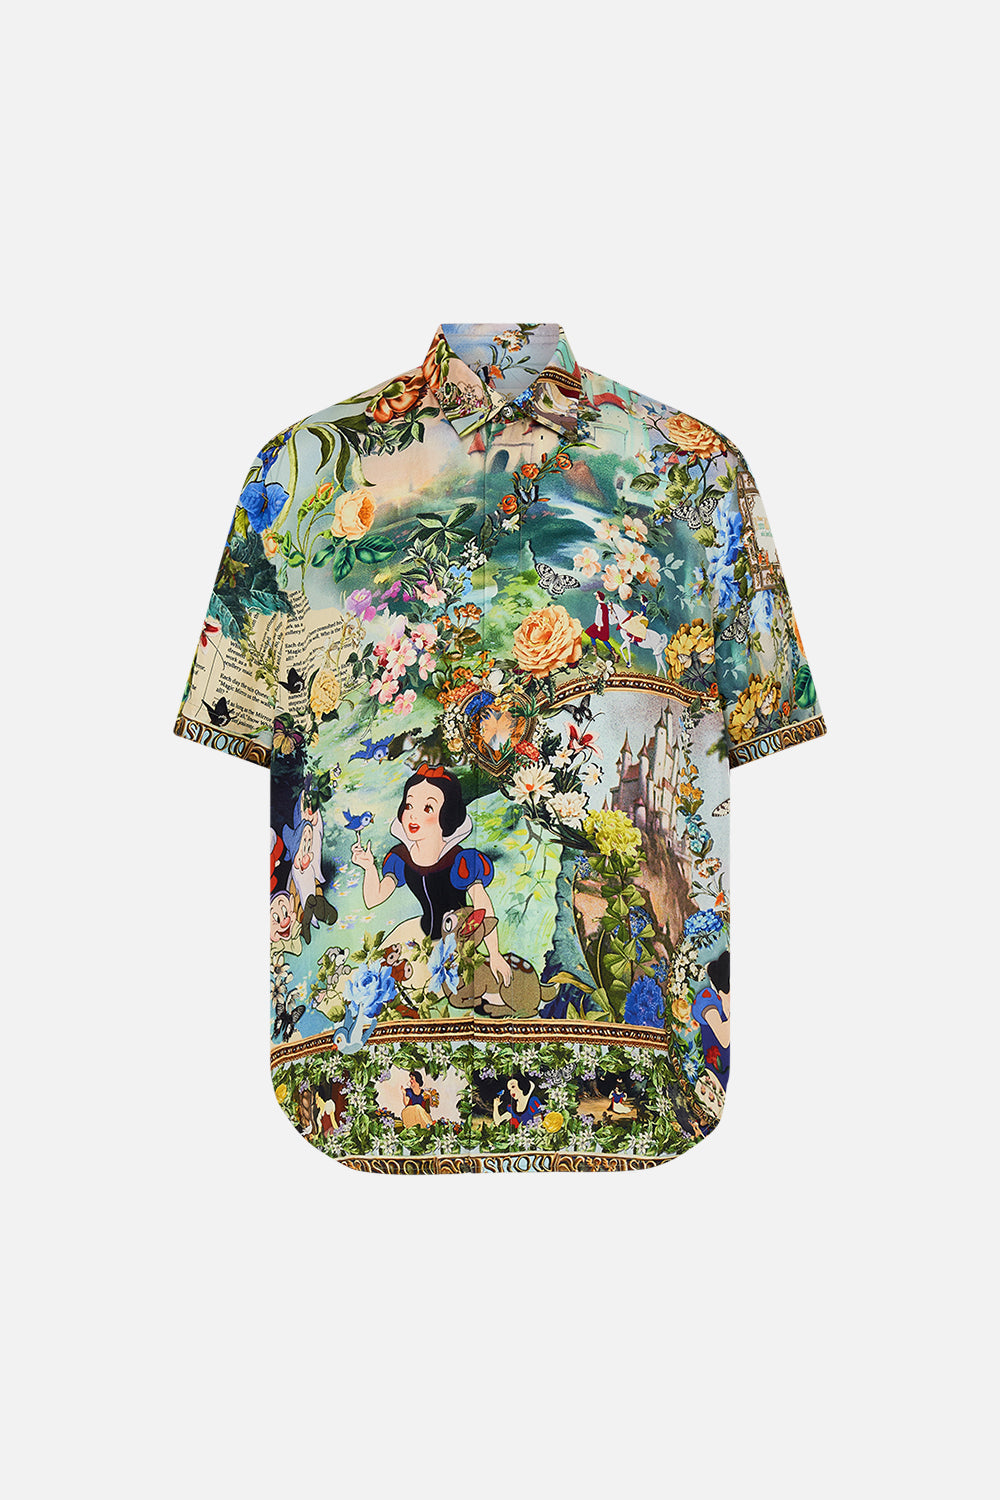 Disney CAMILLA short sleeve shirt in The Kindest One of All print